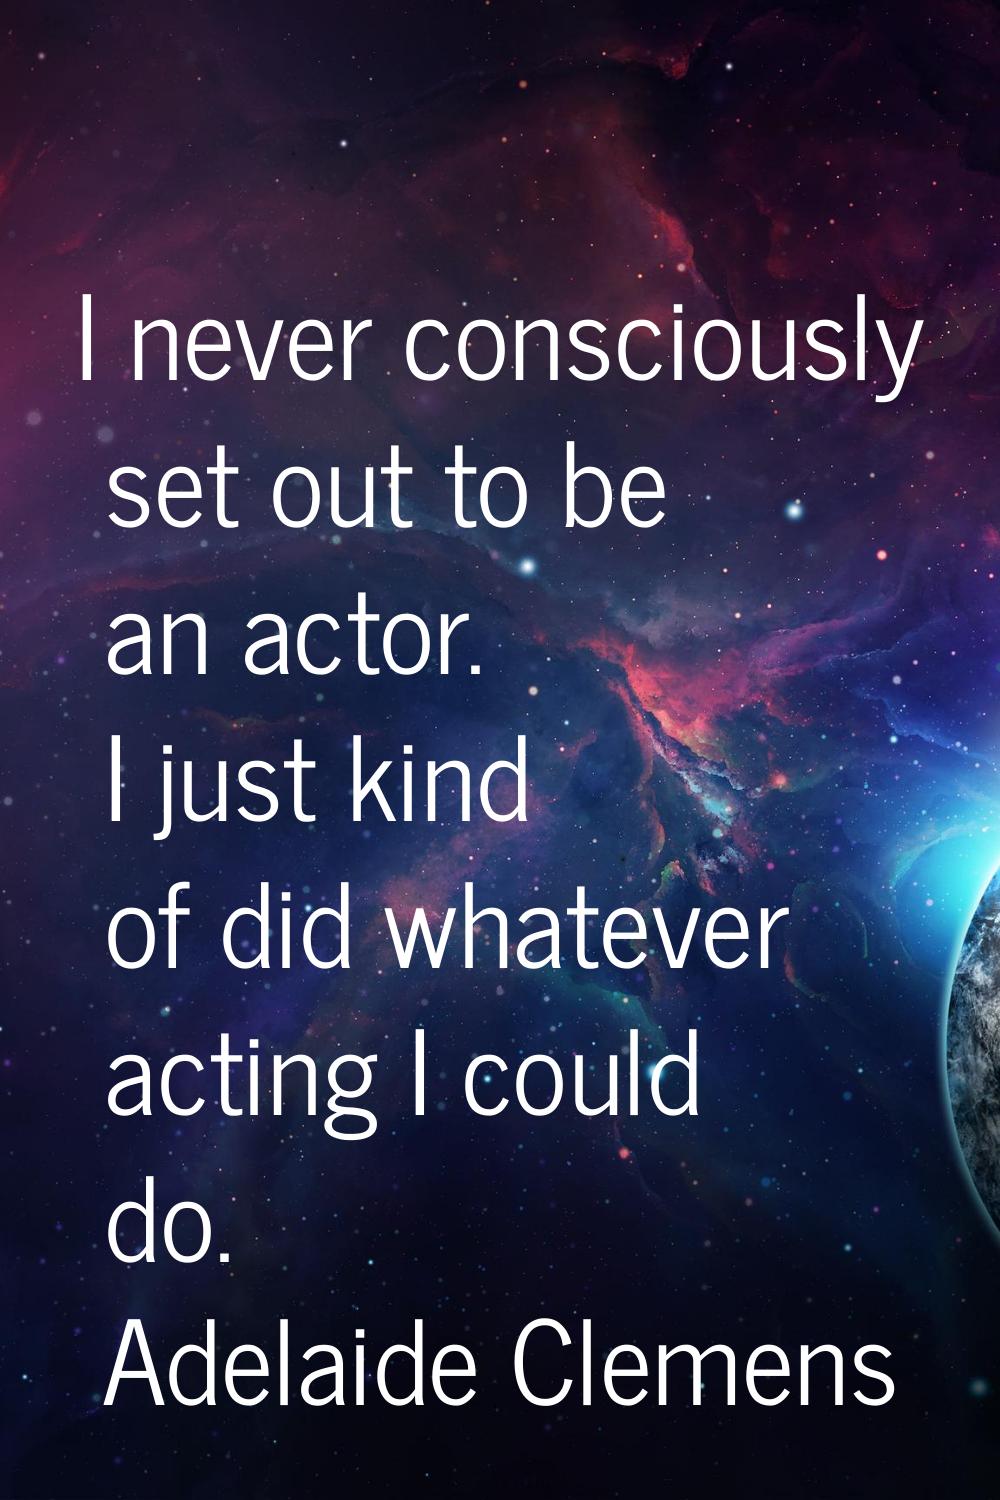 I never consciously set out to be an actor. I just kind of did whatever acting I could do.